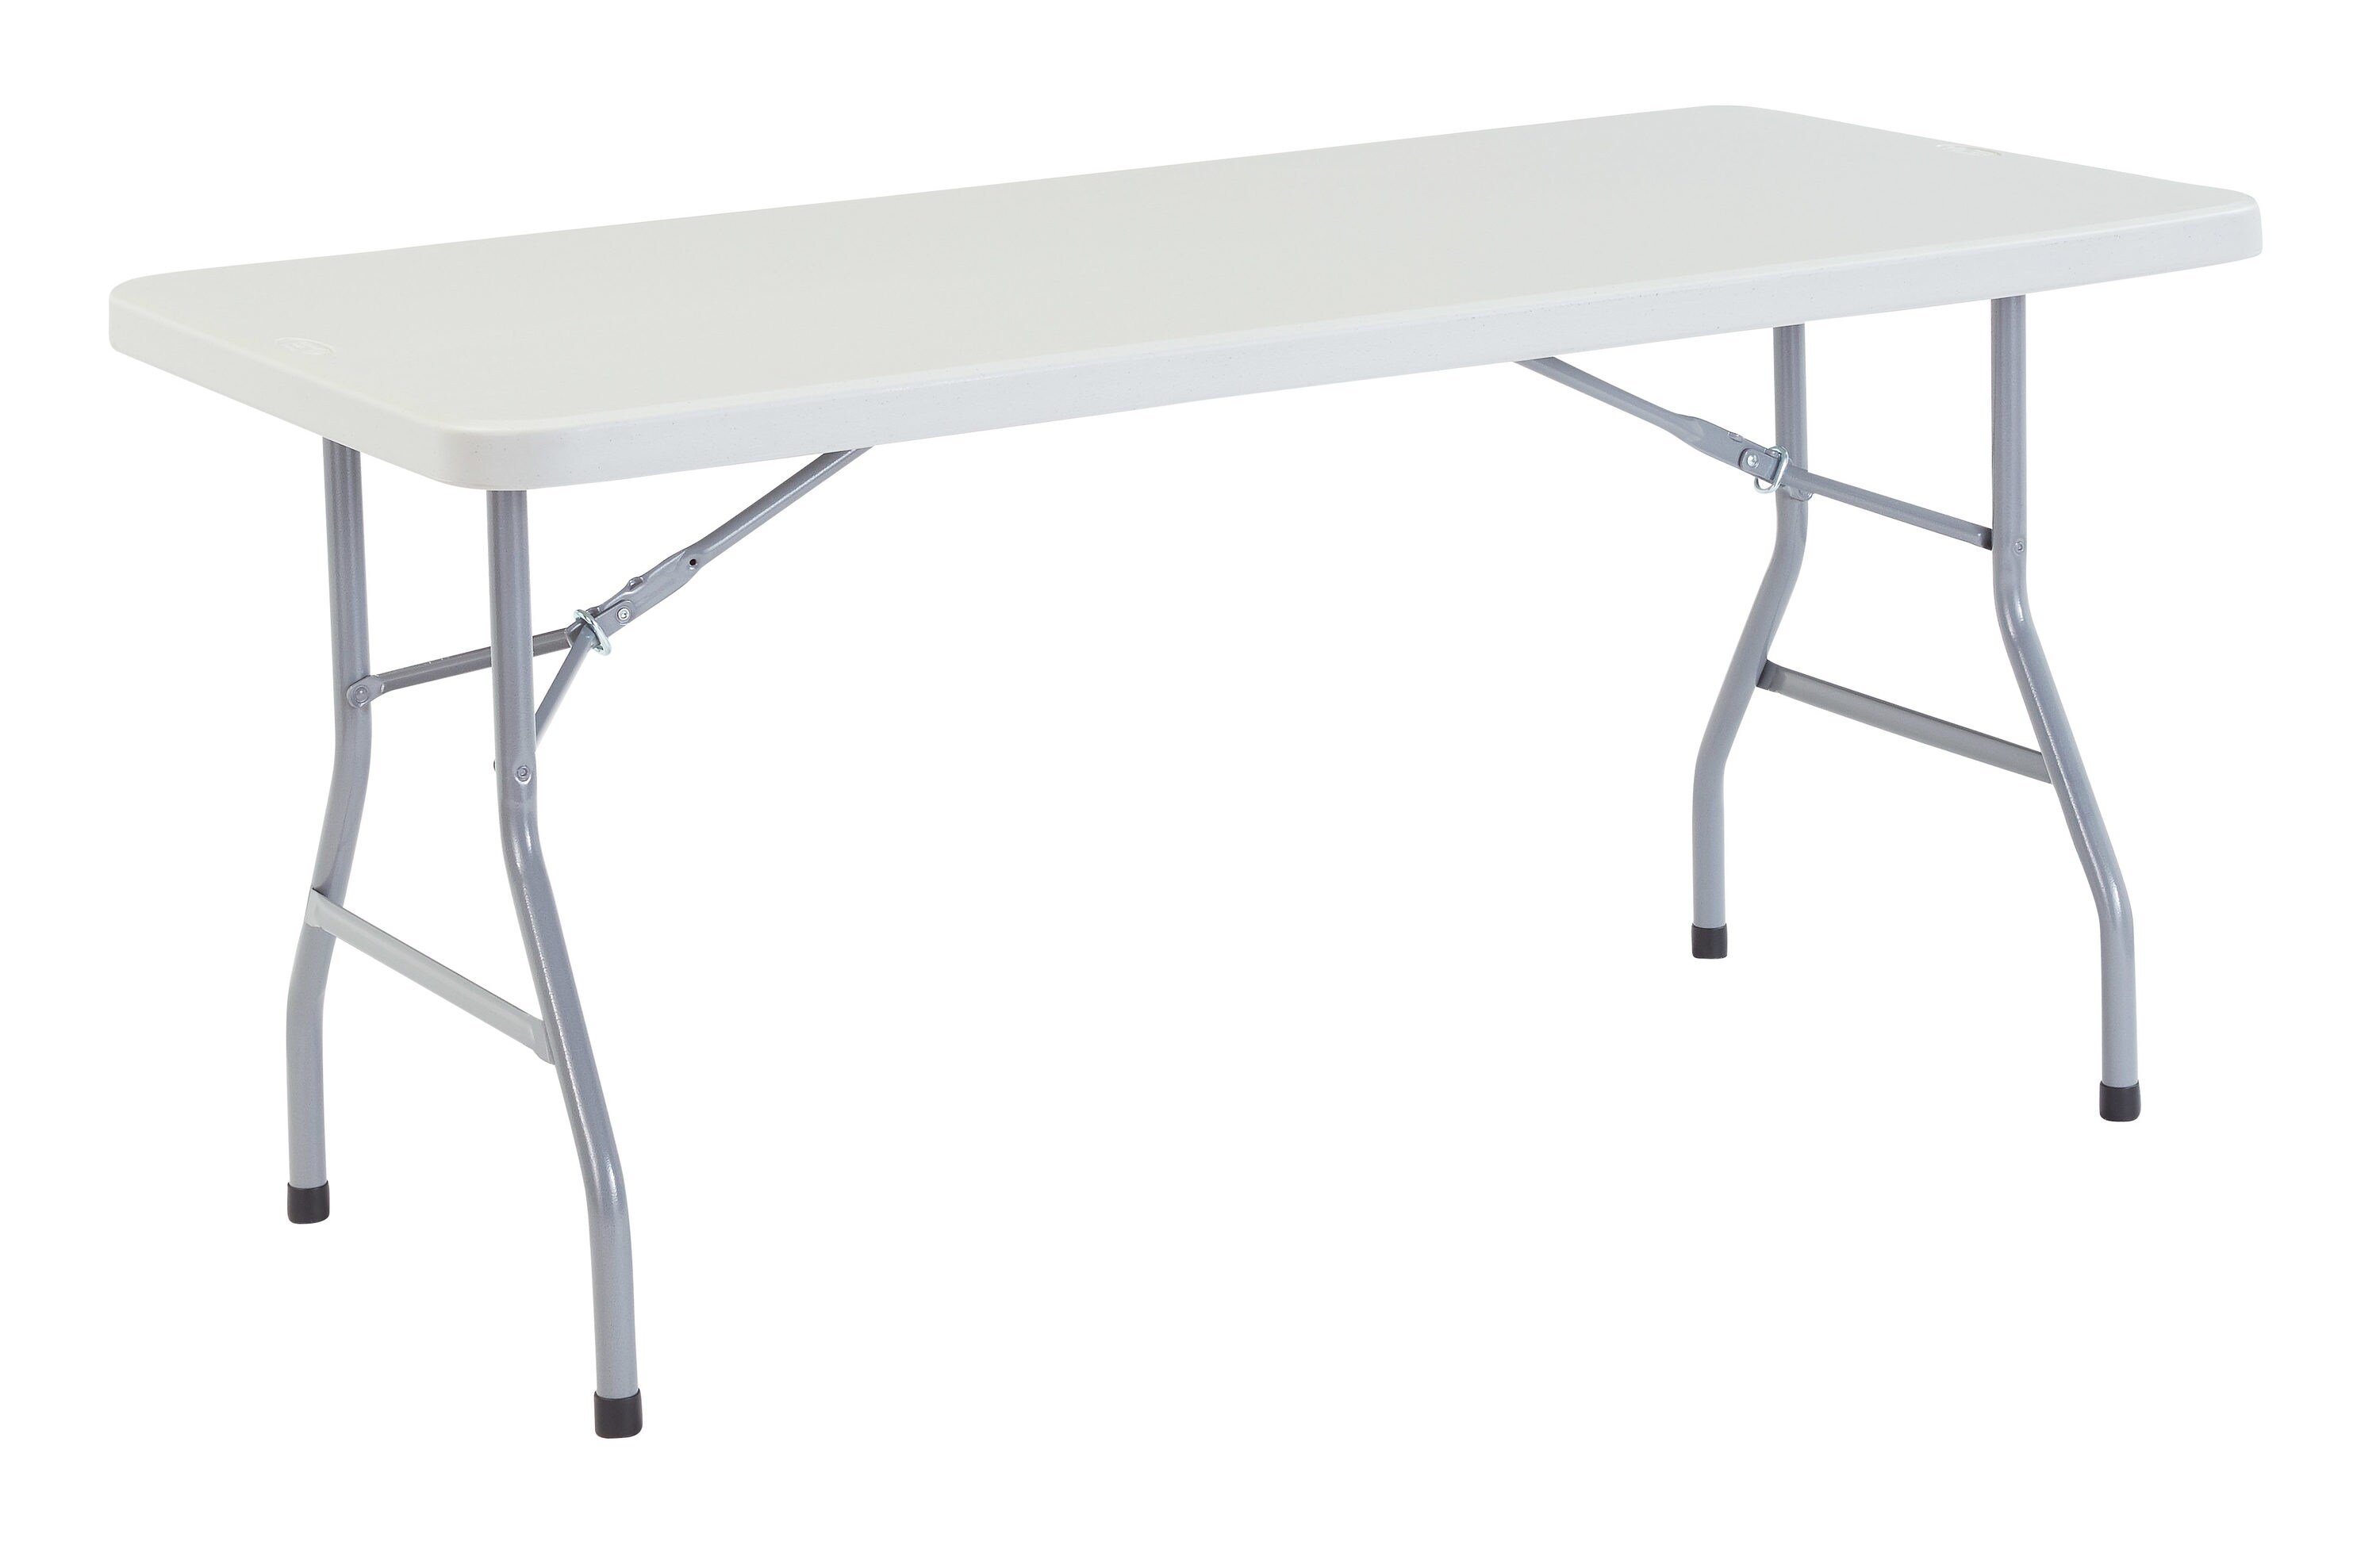 CHAIRS & COVERS 4FT 5FT & 6FT CAMPING CATERING HEAVY DUTY FOLDING TABLE TRESTLE 